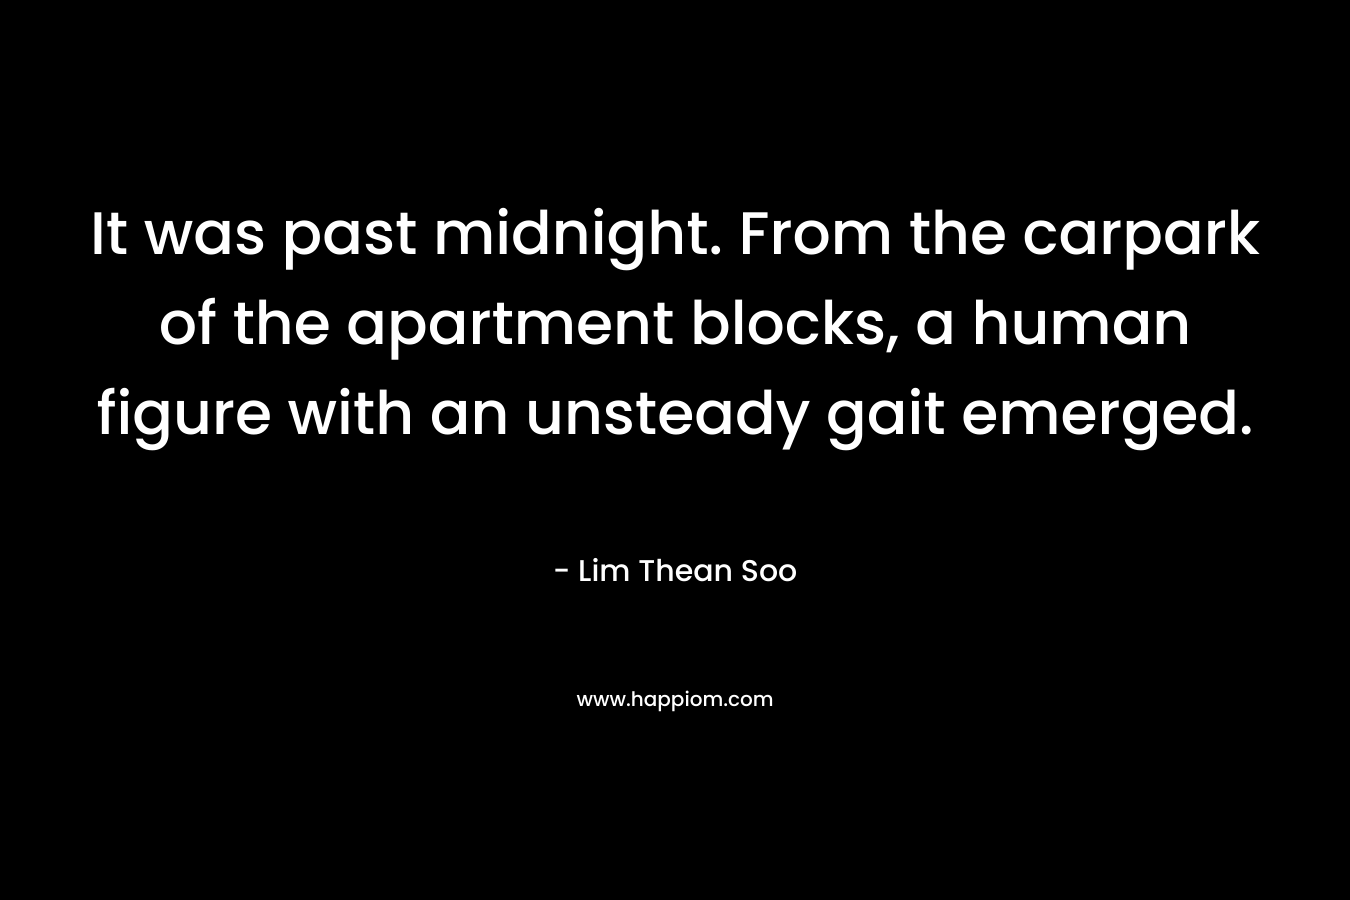 It was past midnight. From the carpark of the apartment blocks, a human figure with an unsteady gait emerged. – Lim Thean Soo